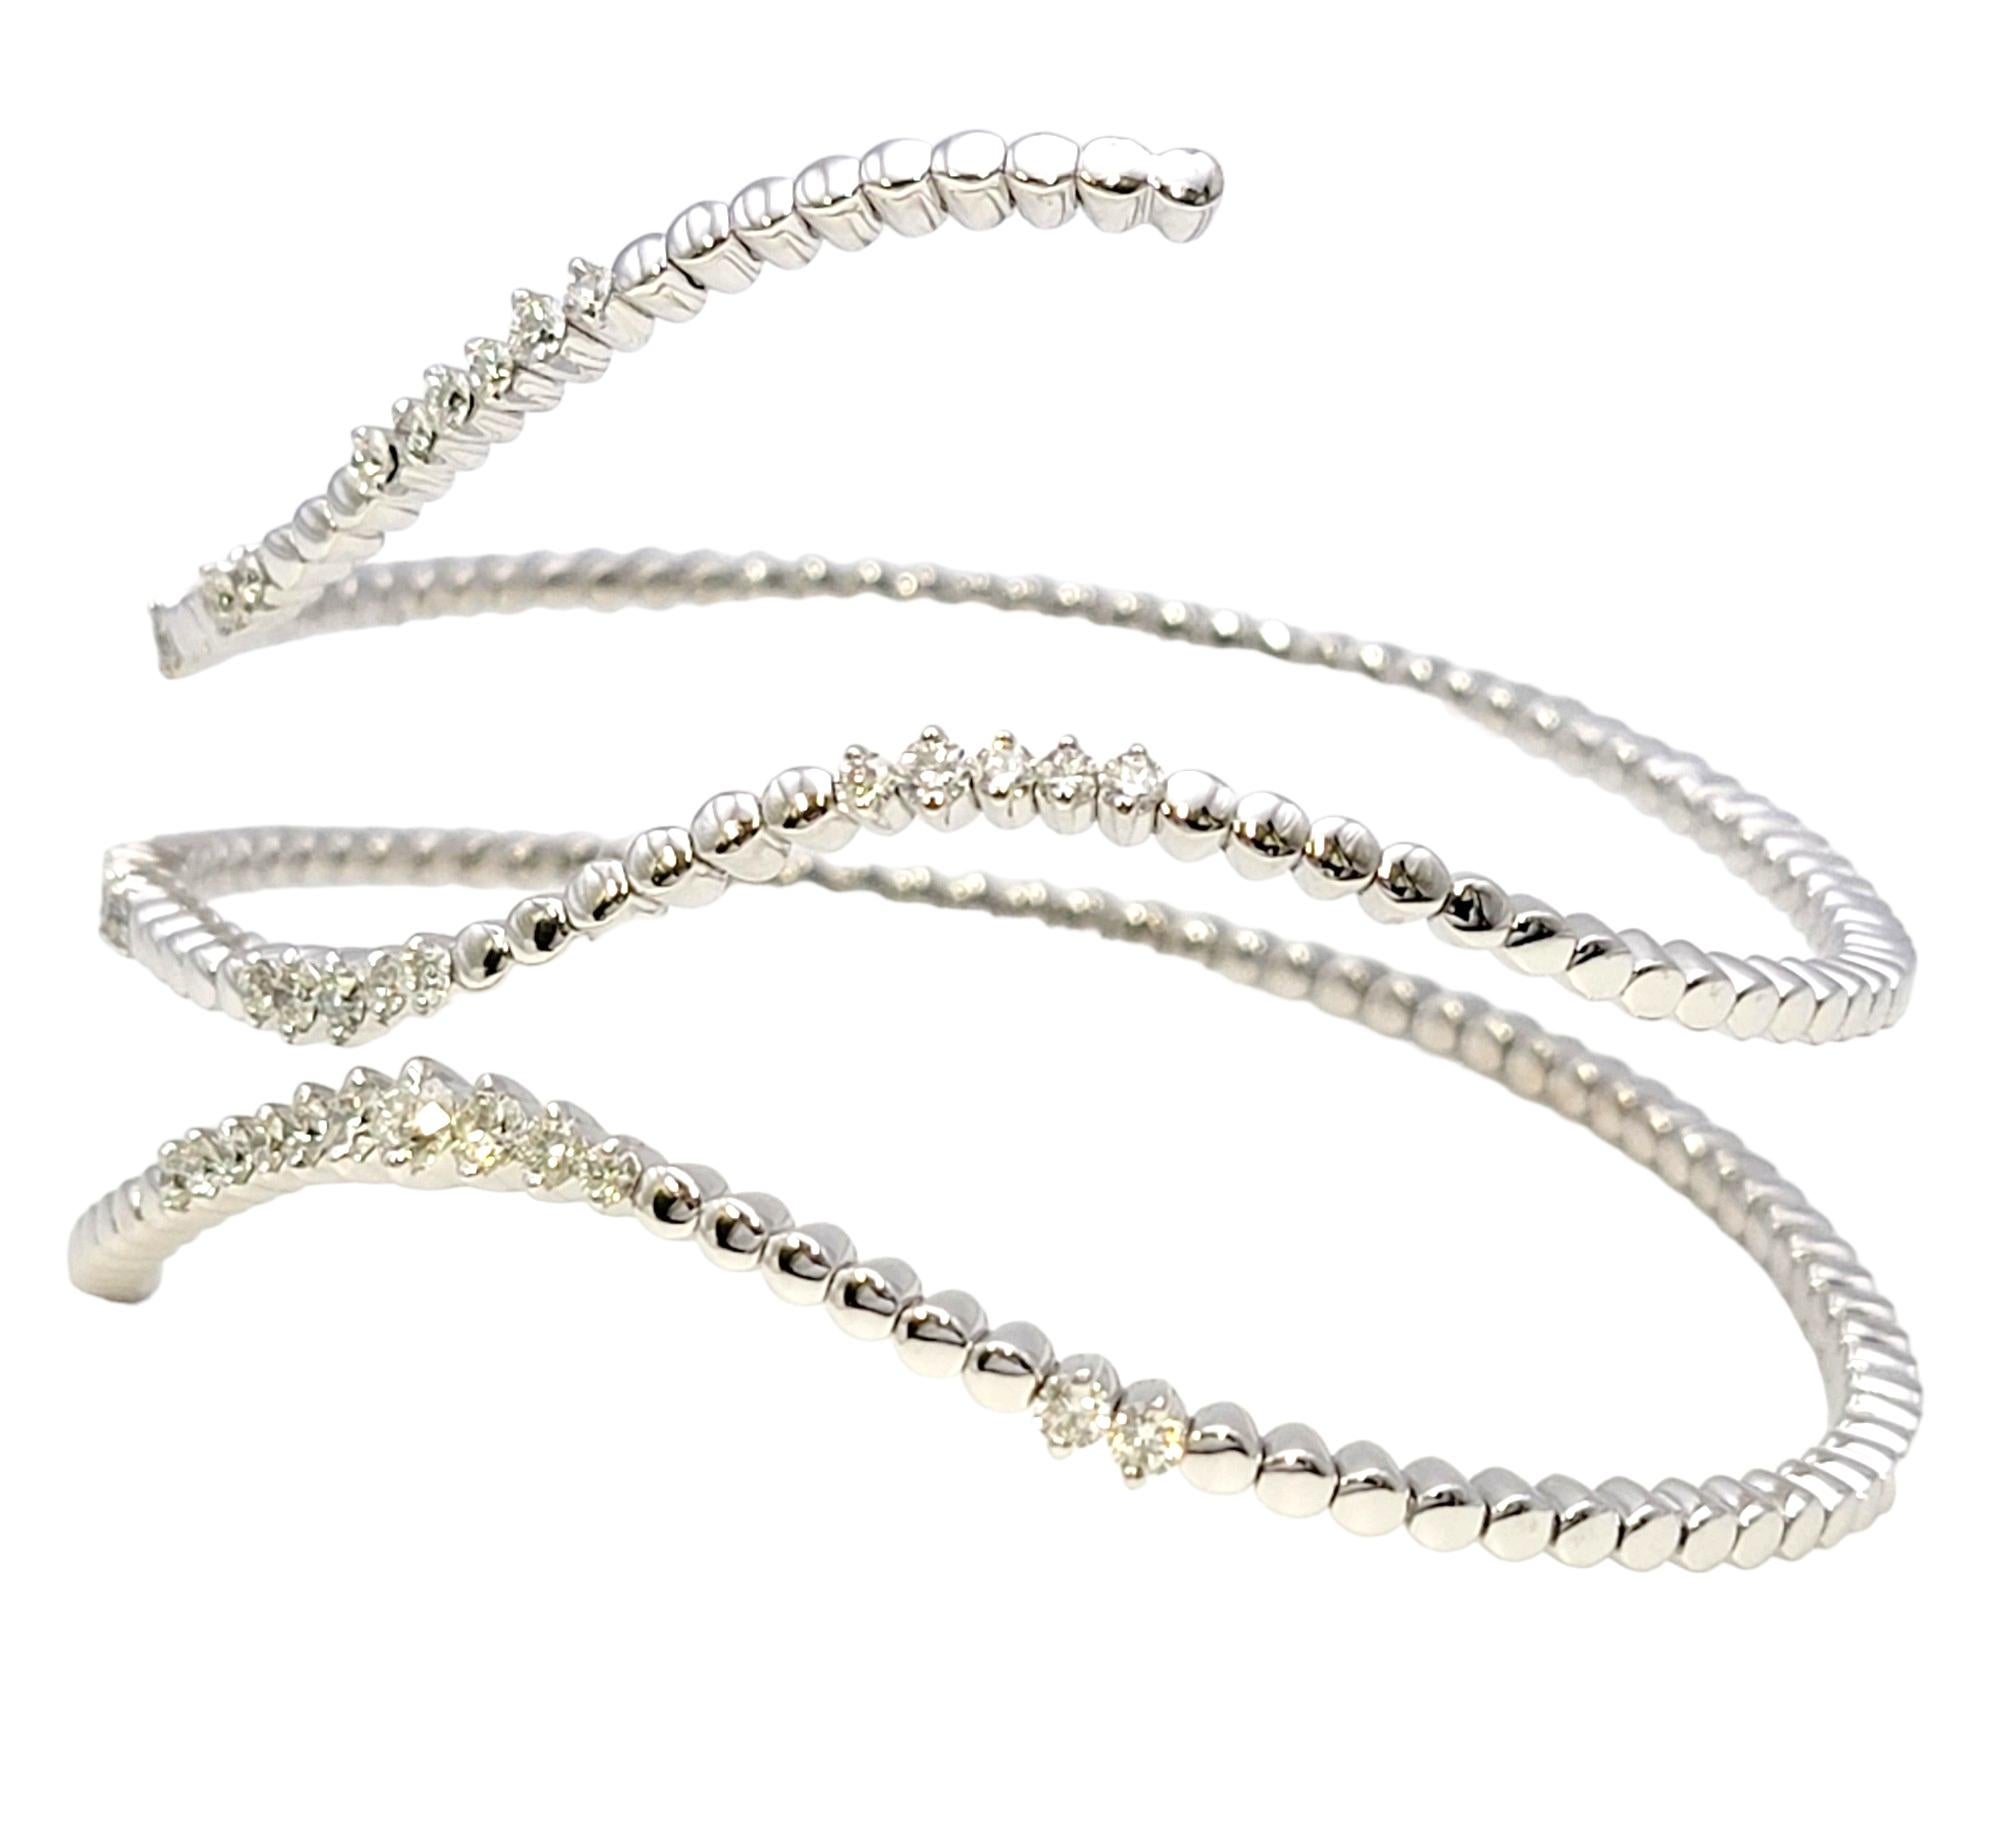 Experience the perfect blend of sophistication and glamour with the Effy Pave Classica diamond wrap bracelet. This exquisite piece by renowned designer Effy captures the essence of timeless beauty and showcases the brilliance of diamonds in a